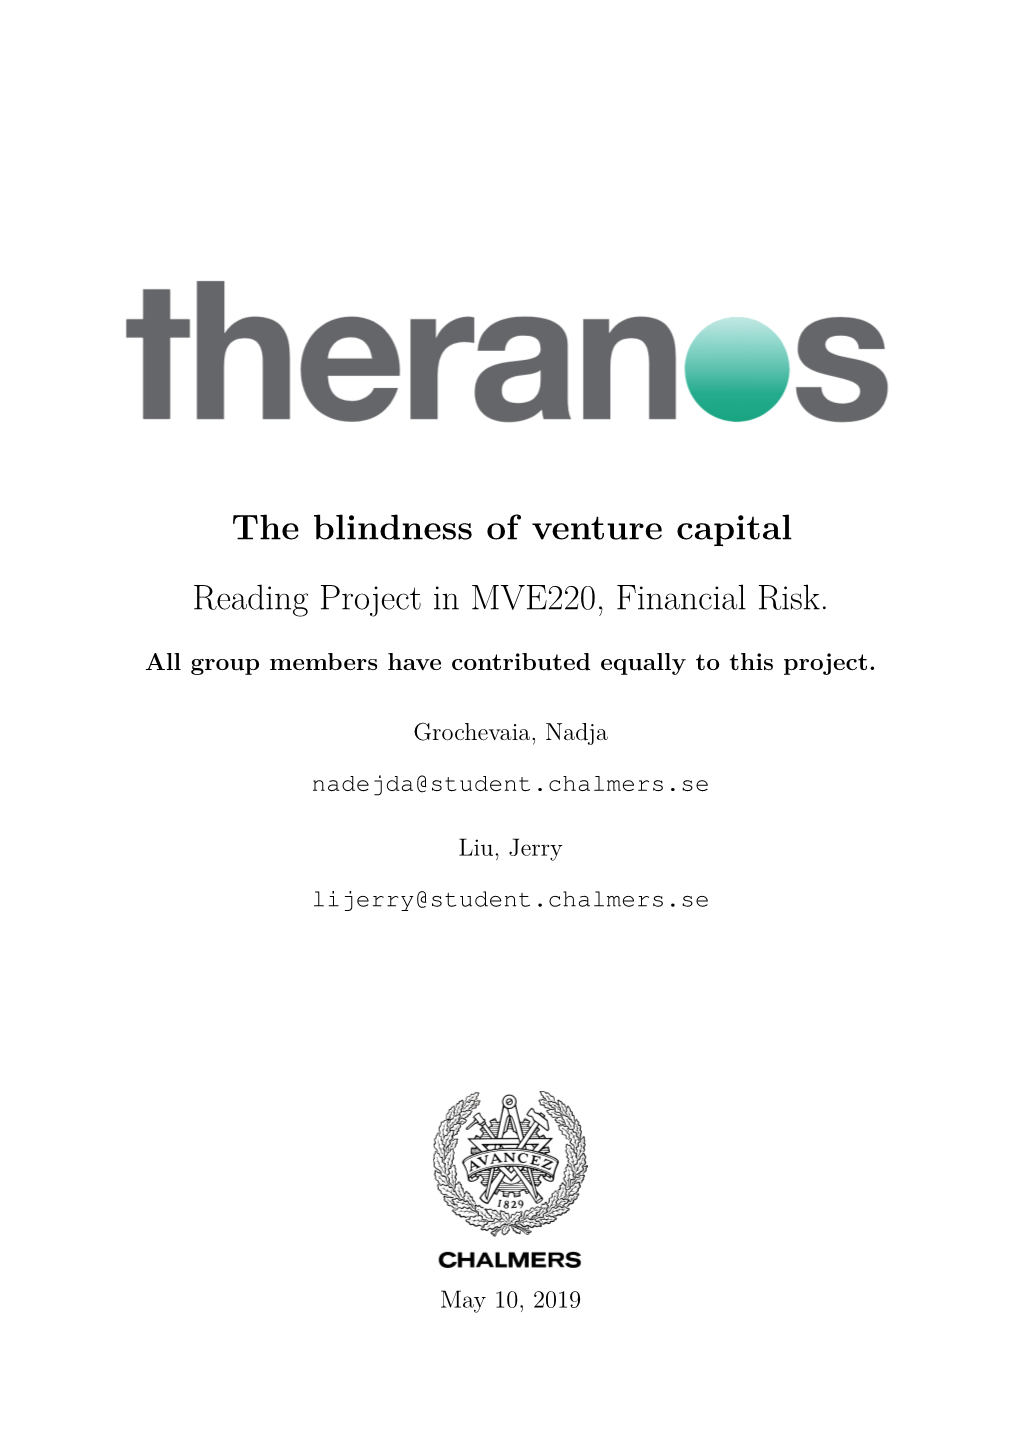 Theranos, the Blindness of Venture Capital